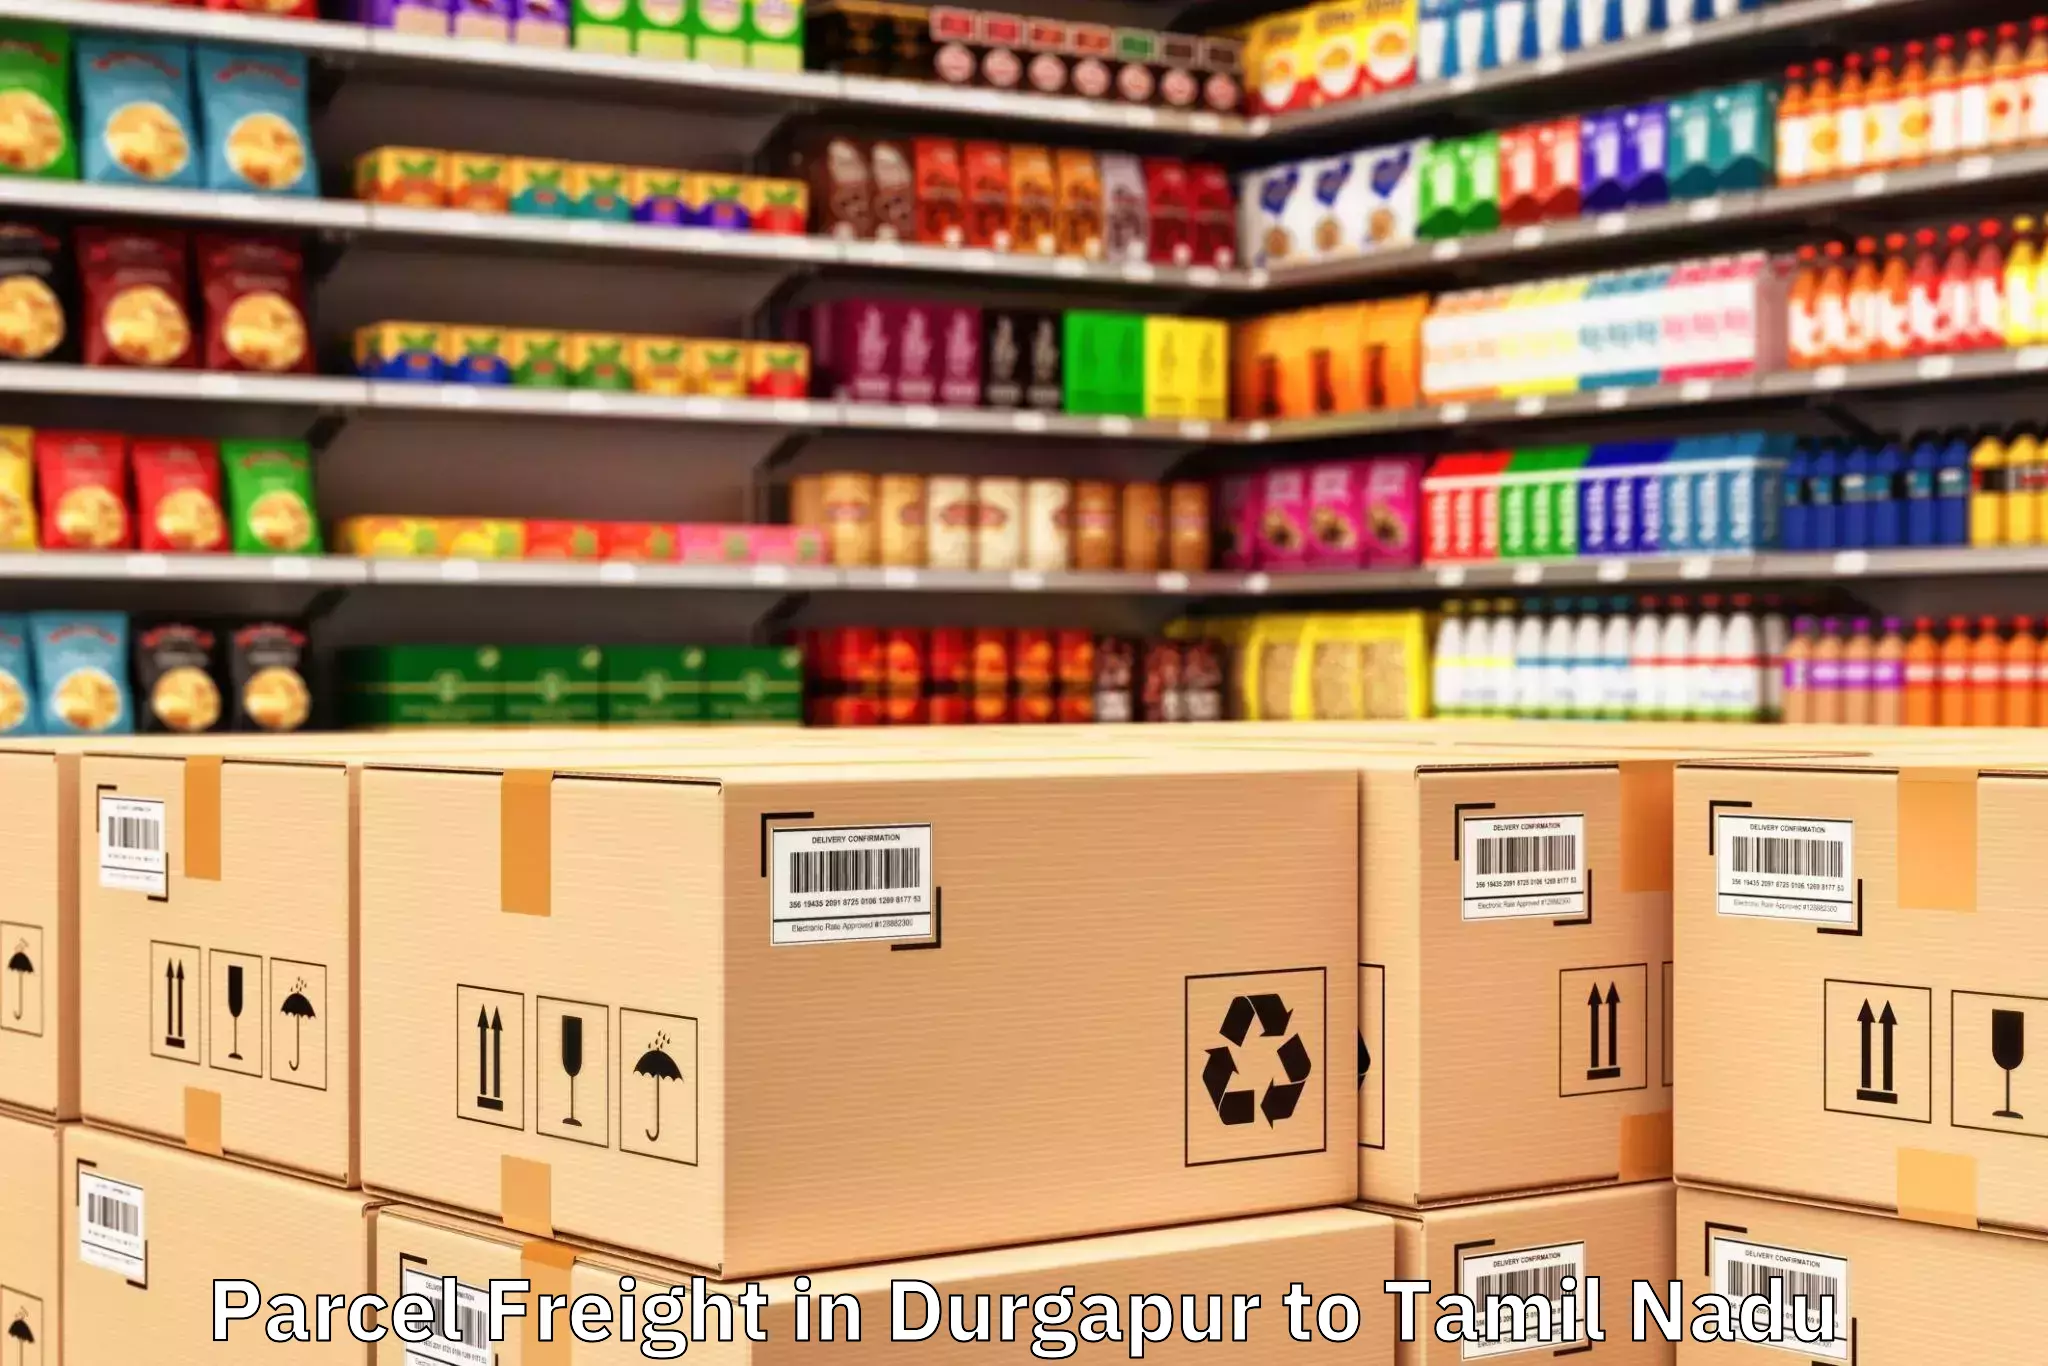 Quality Durgapur to Dhali Parcel Freight